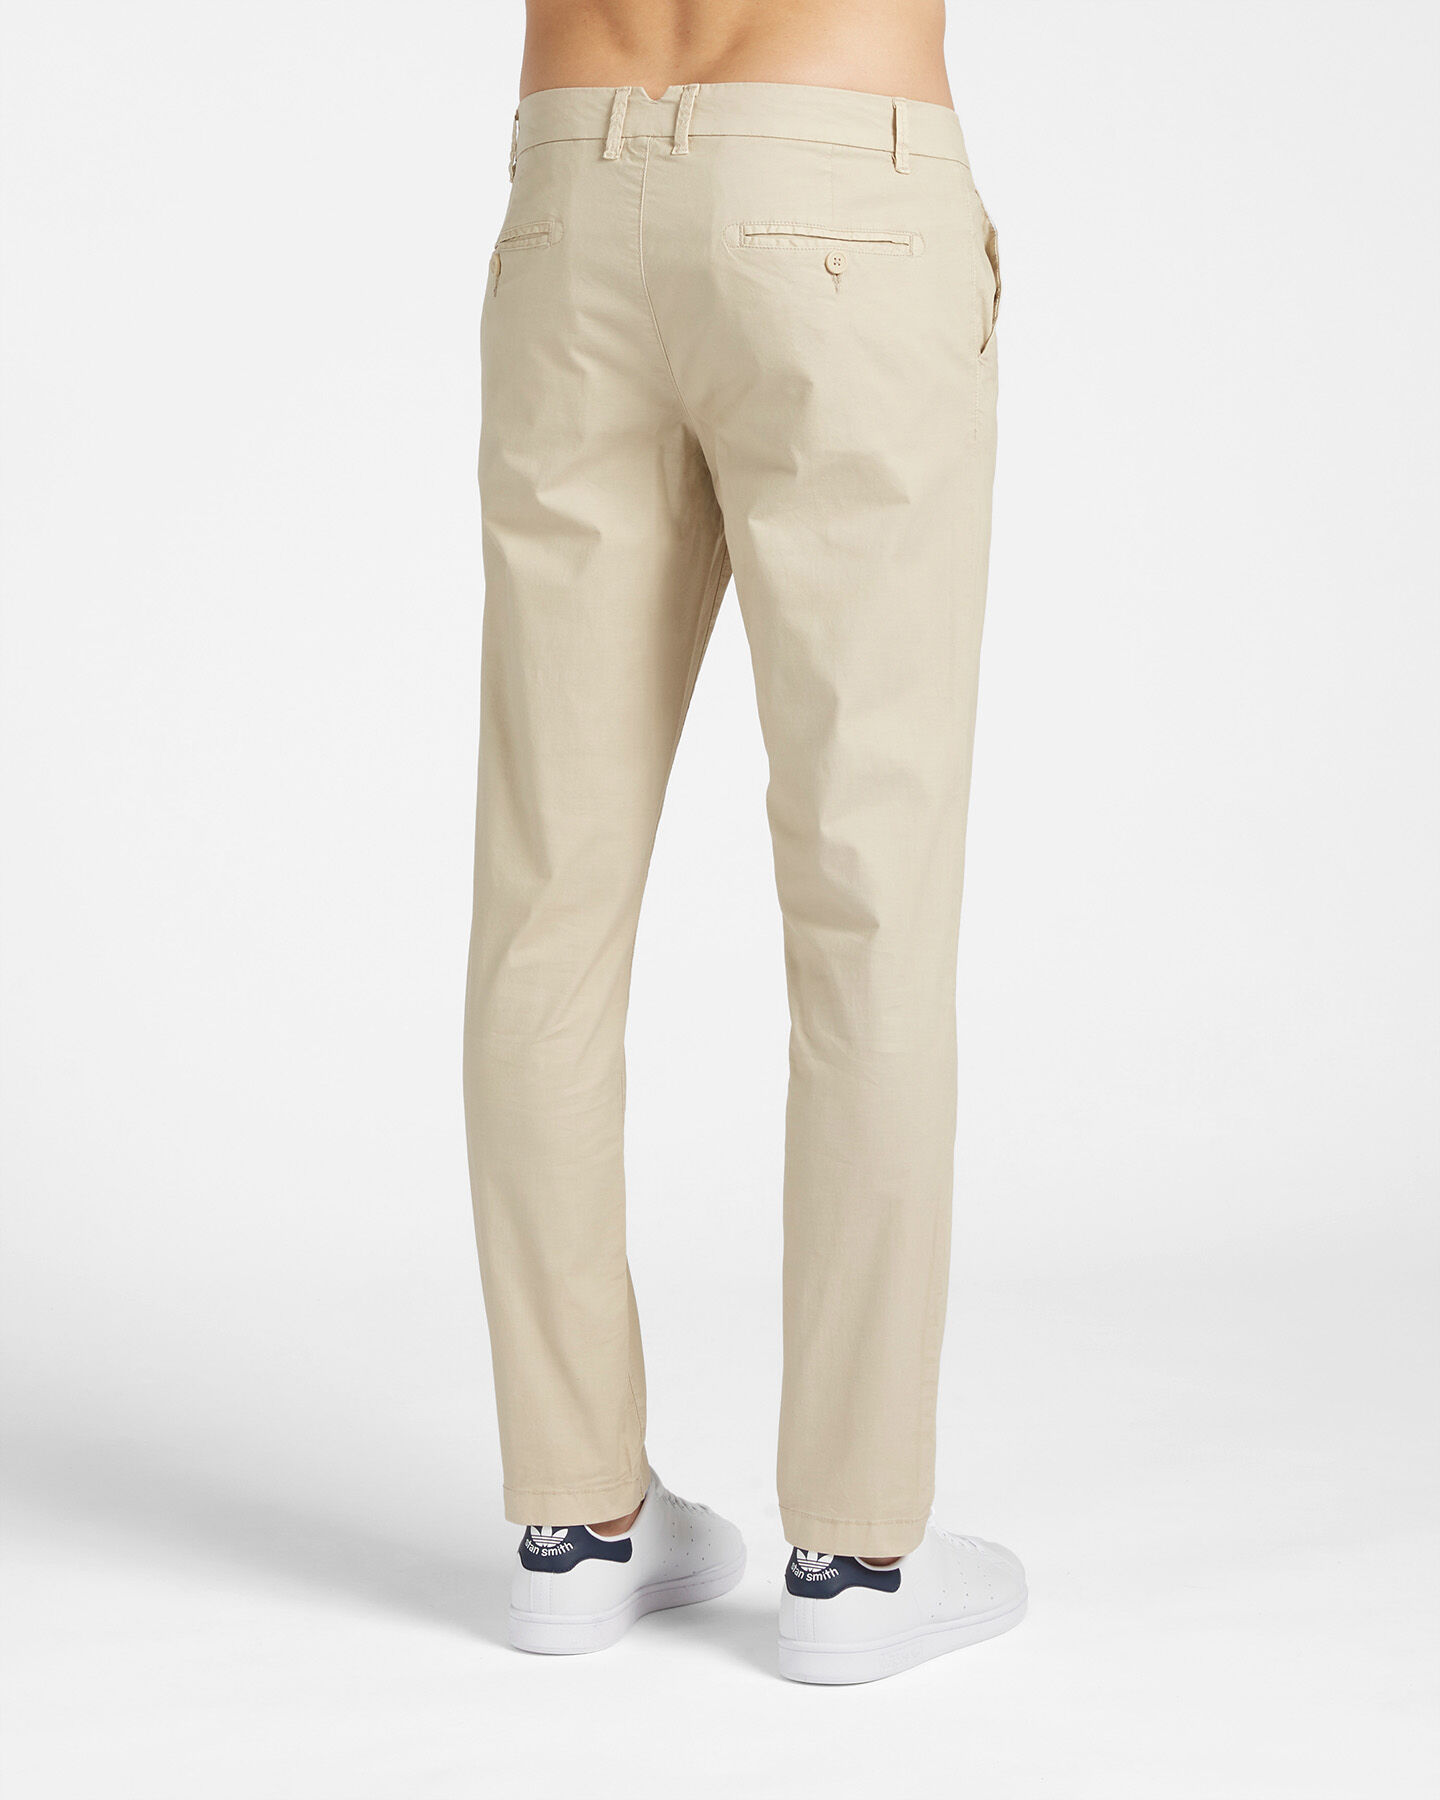  Pantalone DACK'S BASIC COLLECTION M S4118693|007|54 scatto 1